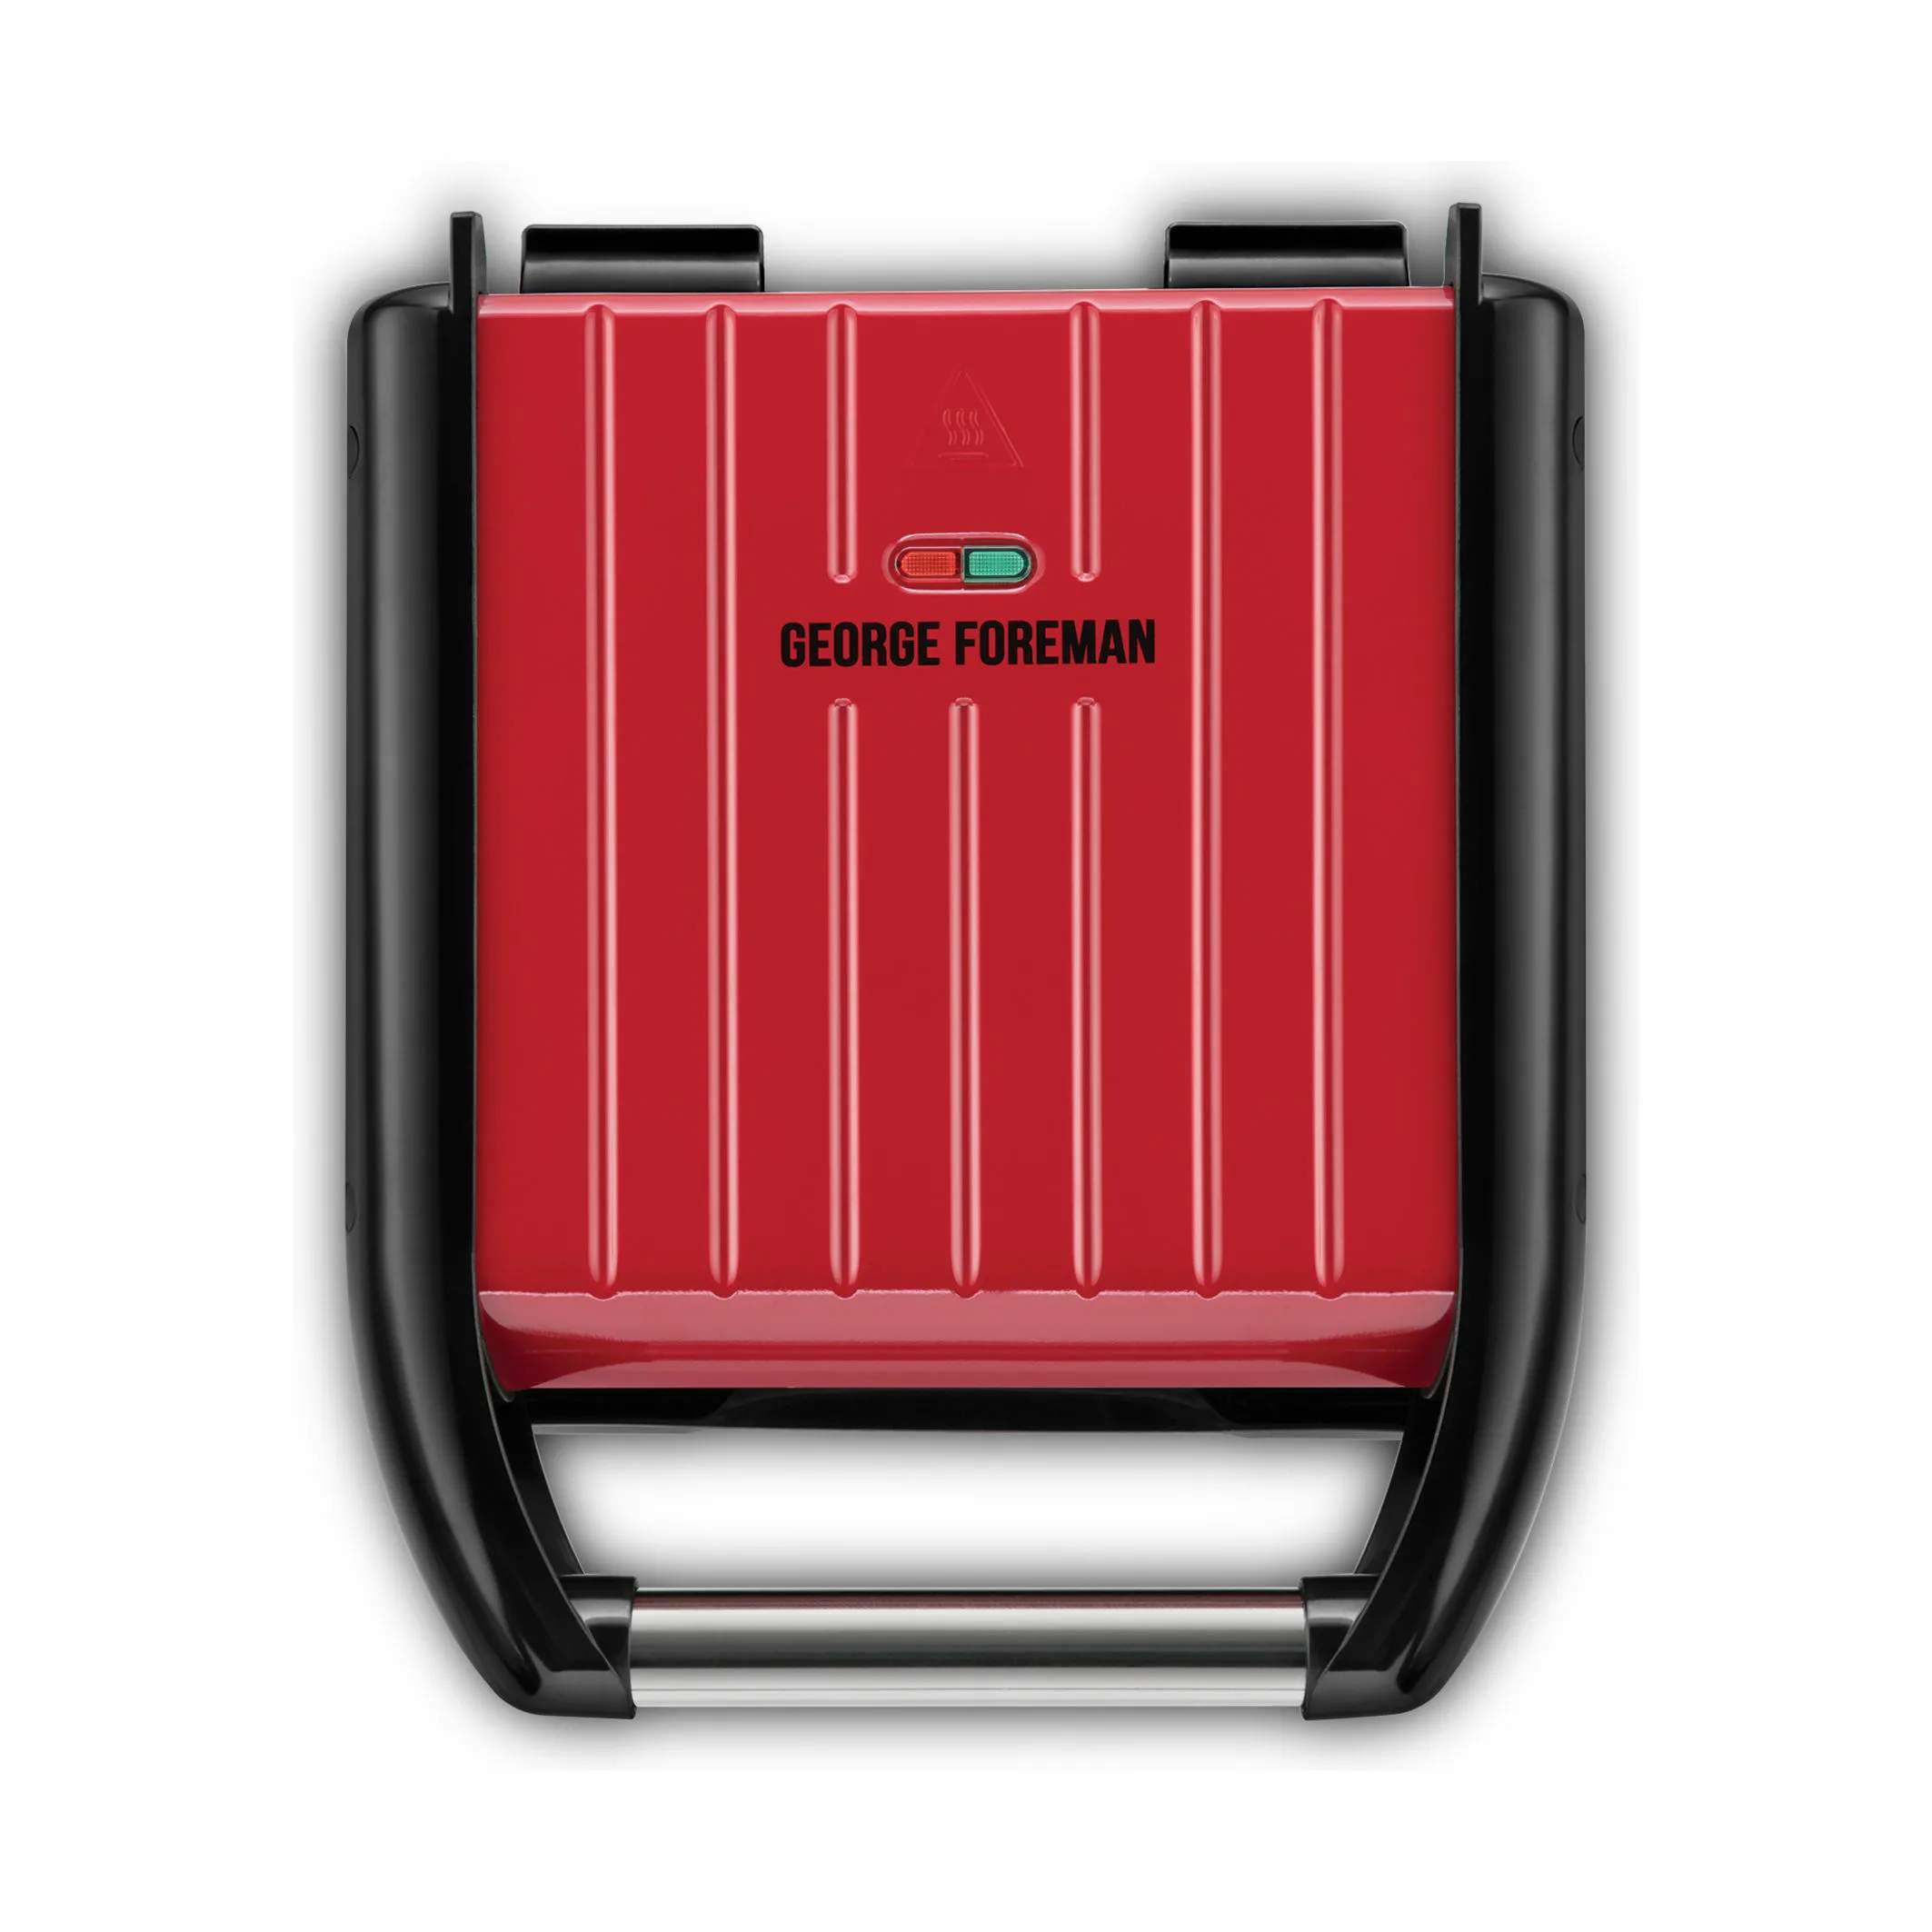 Russell Hobbs bordgrill George Foreman Steel Compact Grill